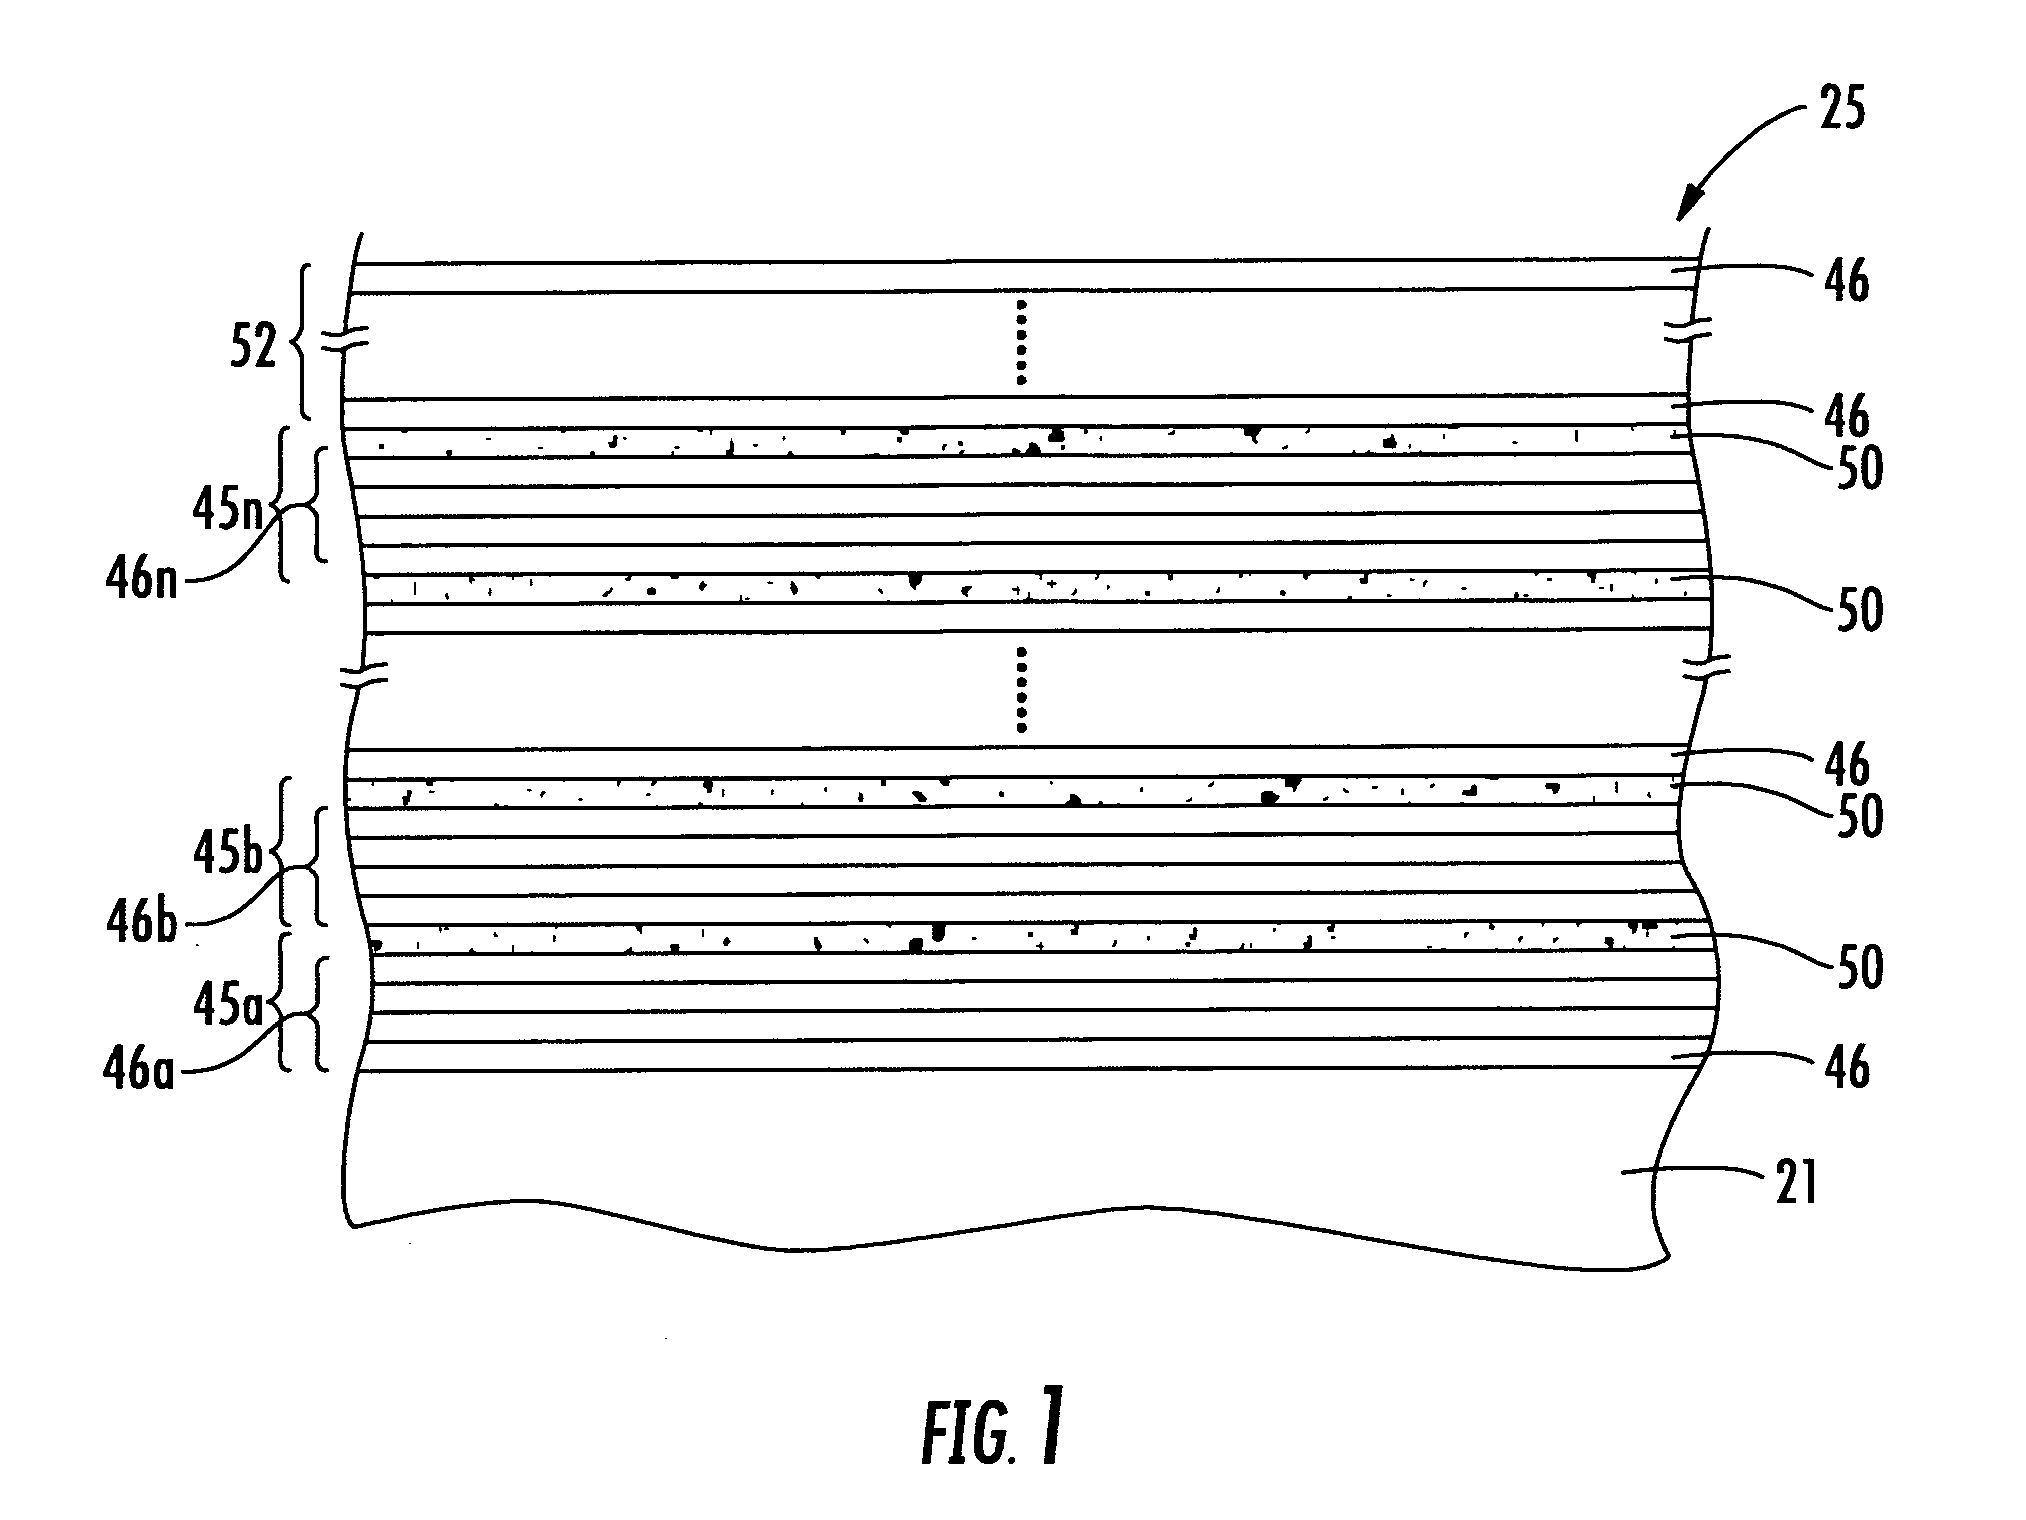 Electronic device including a poled superlattice having a net electrical dipole moment